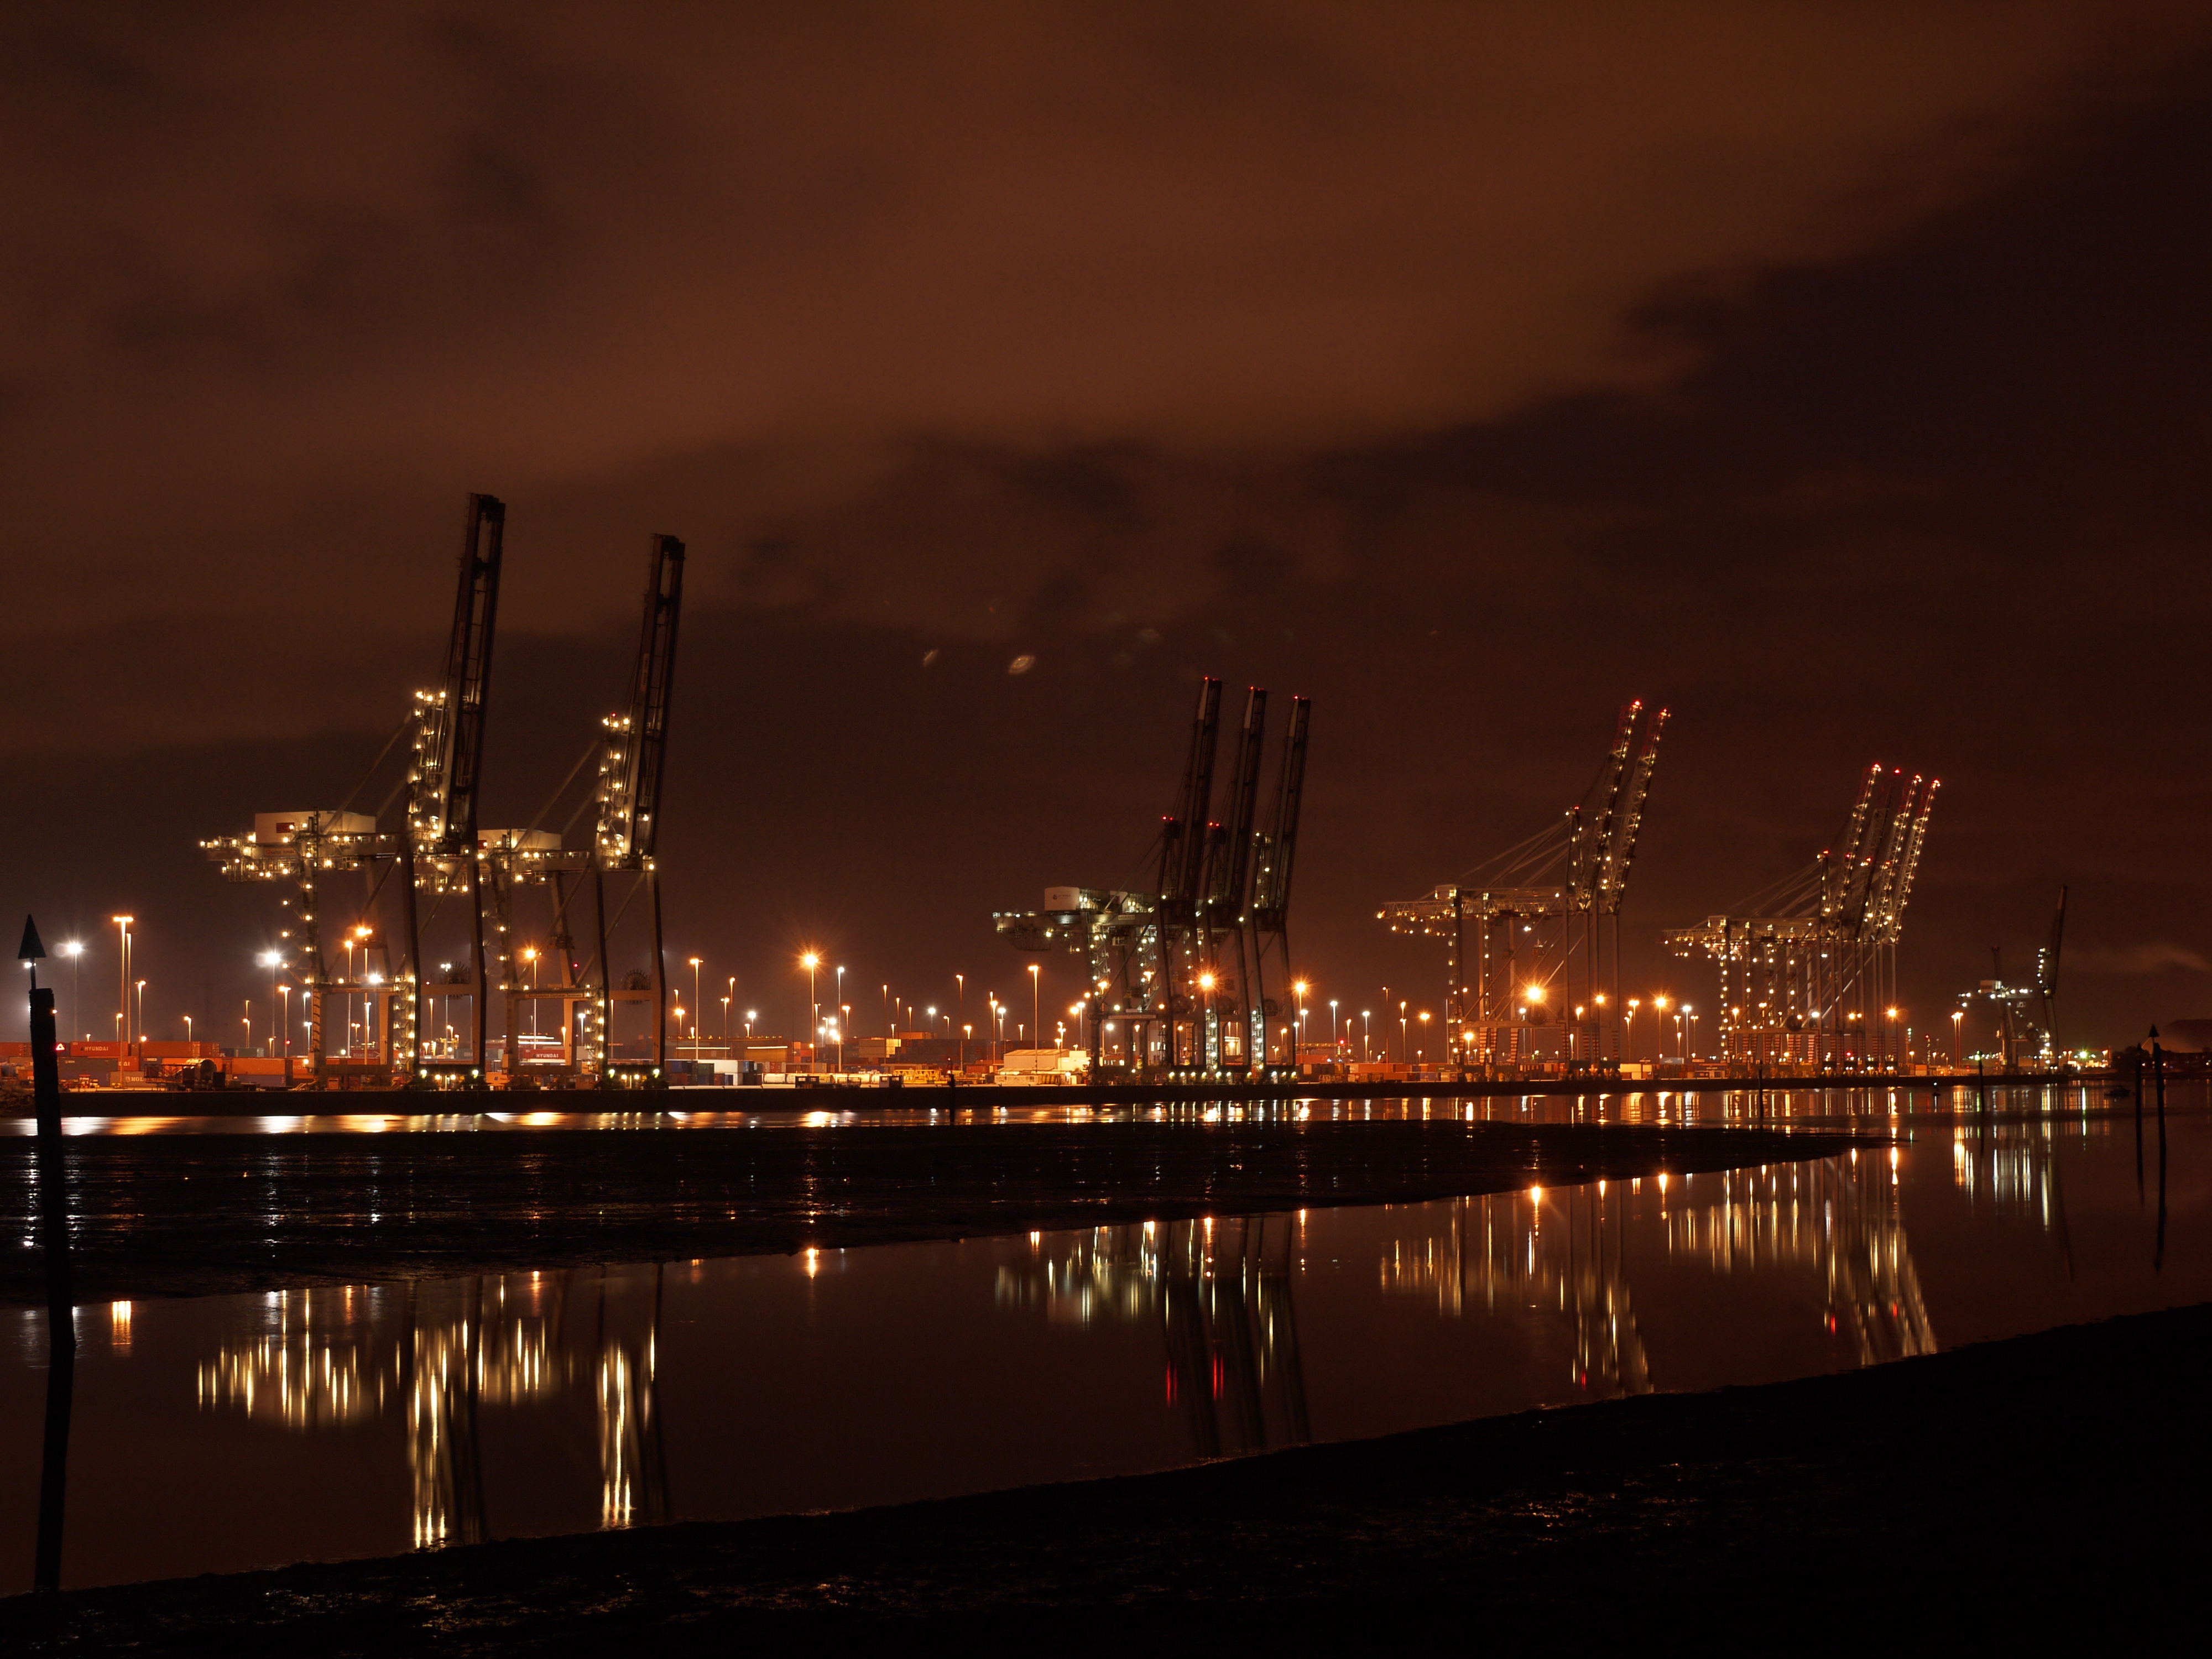 File:Southampton container port at night.JPG - Wikimedia Commons